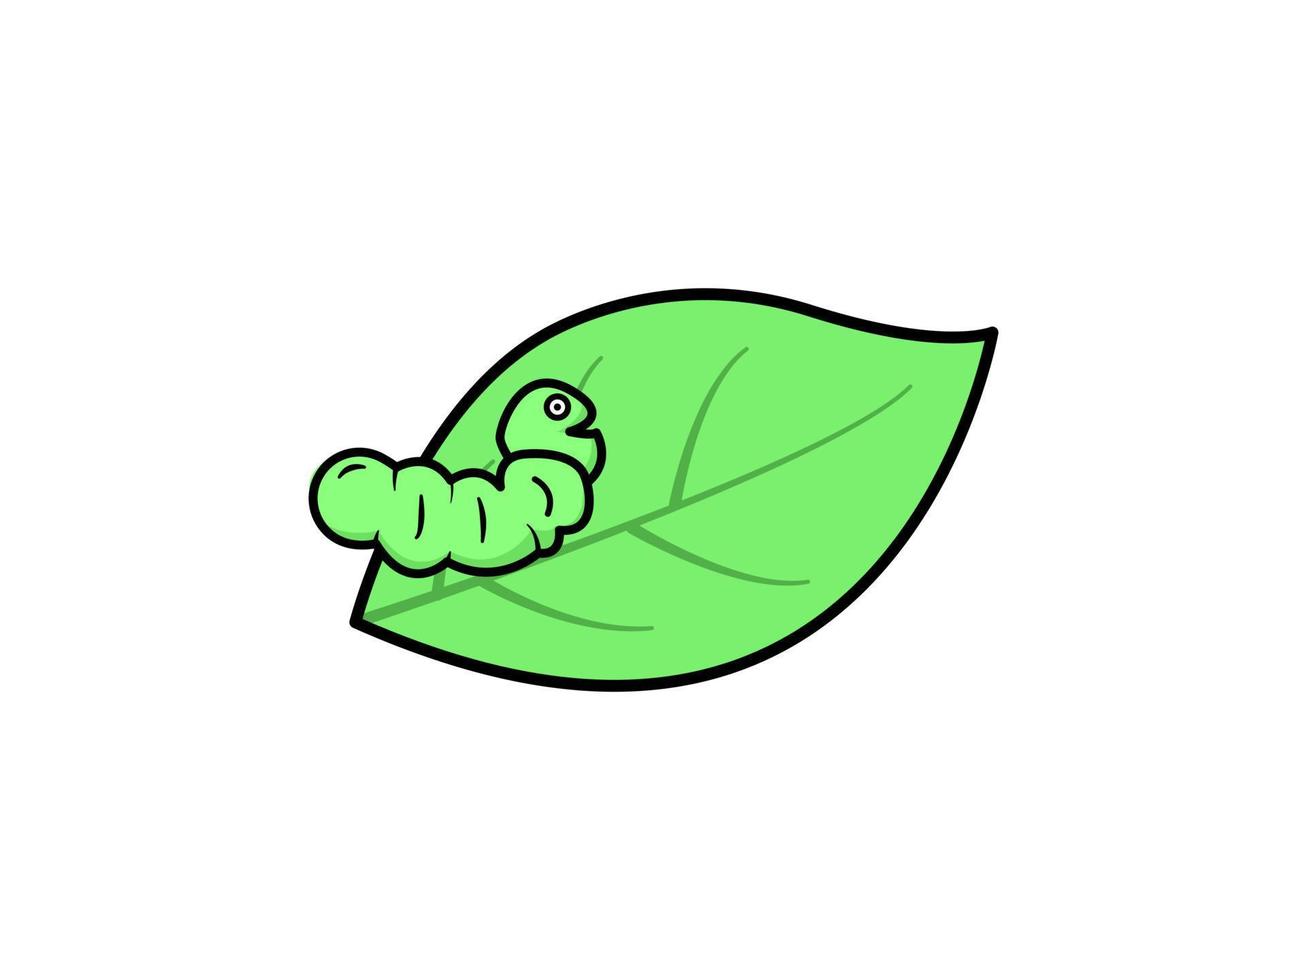 caterpillar vector design on a green leaf suitable for use as a complement to the design